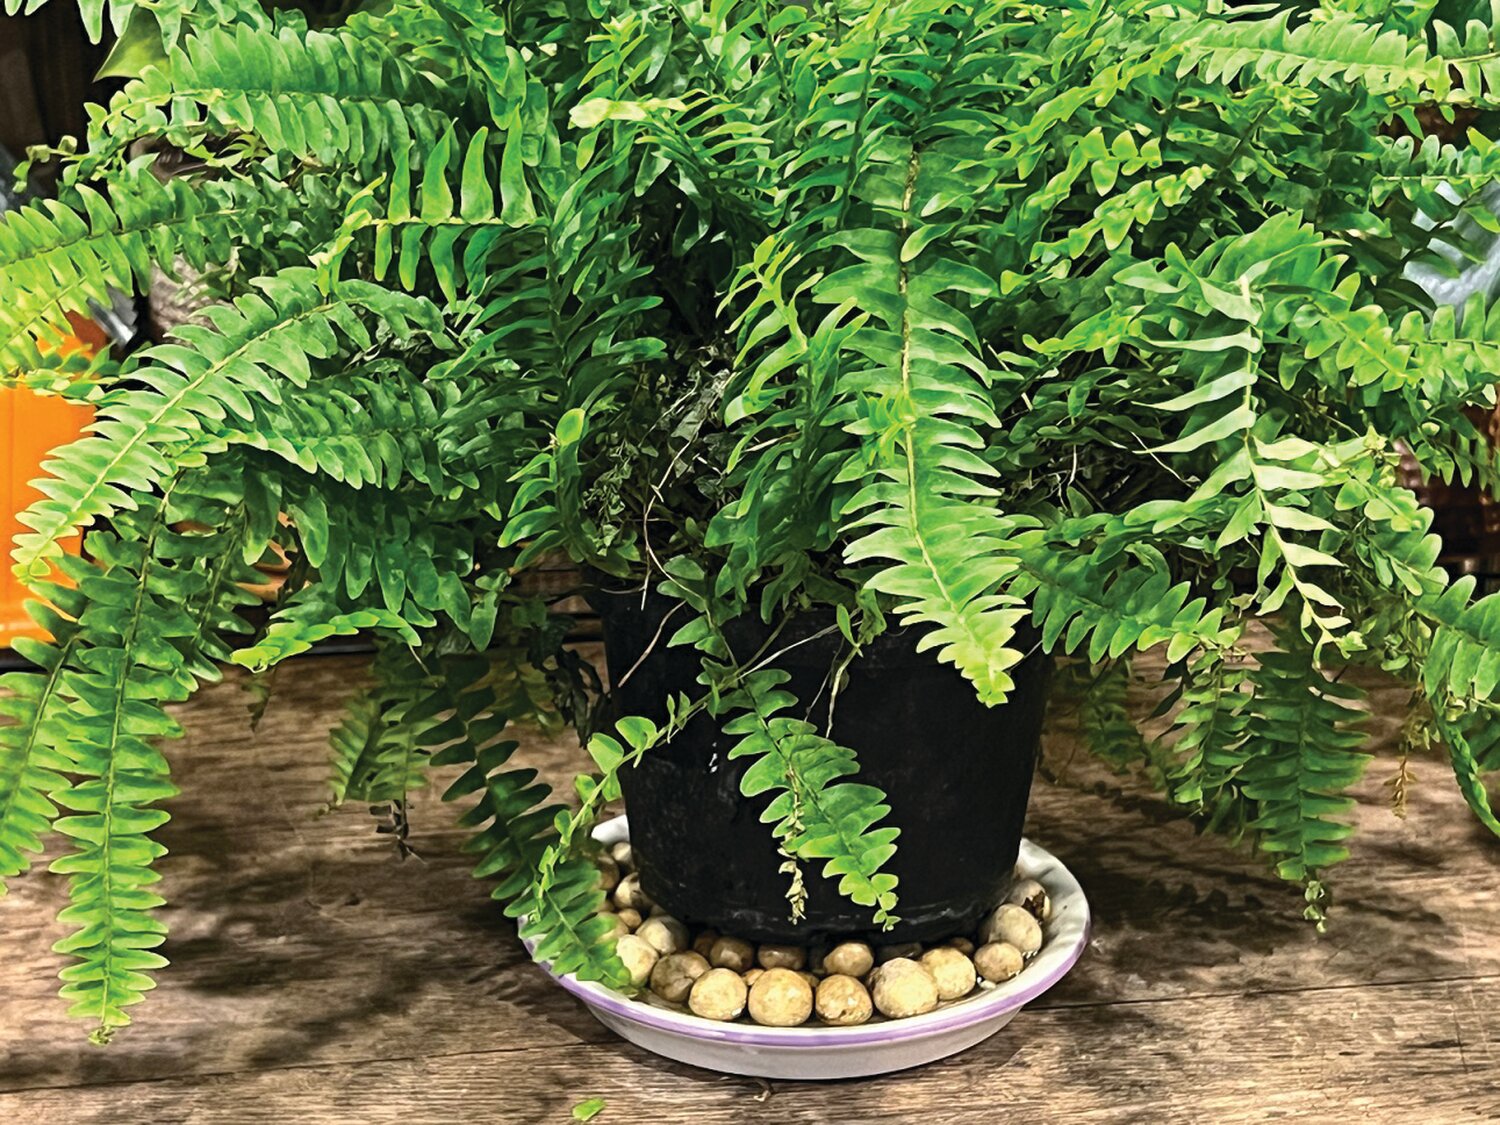 A fern set upon rocks in a tray minimizes the chance of root rot and increases humidity around the plant.